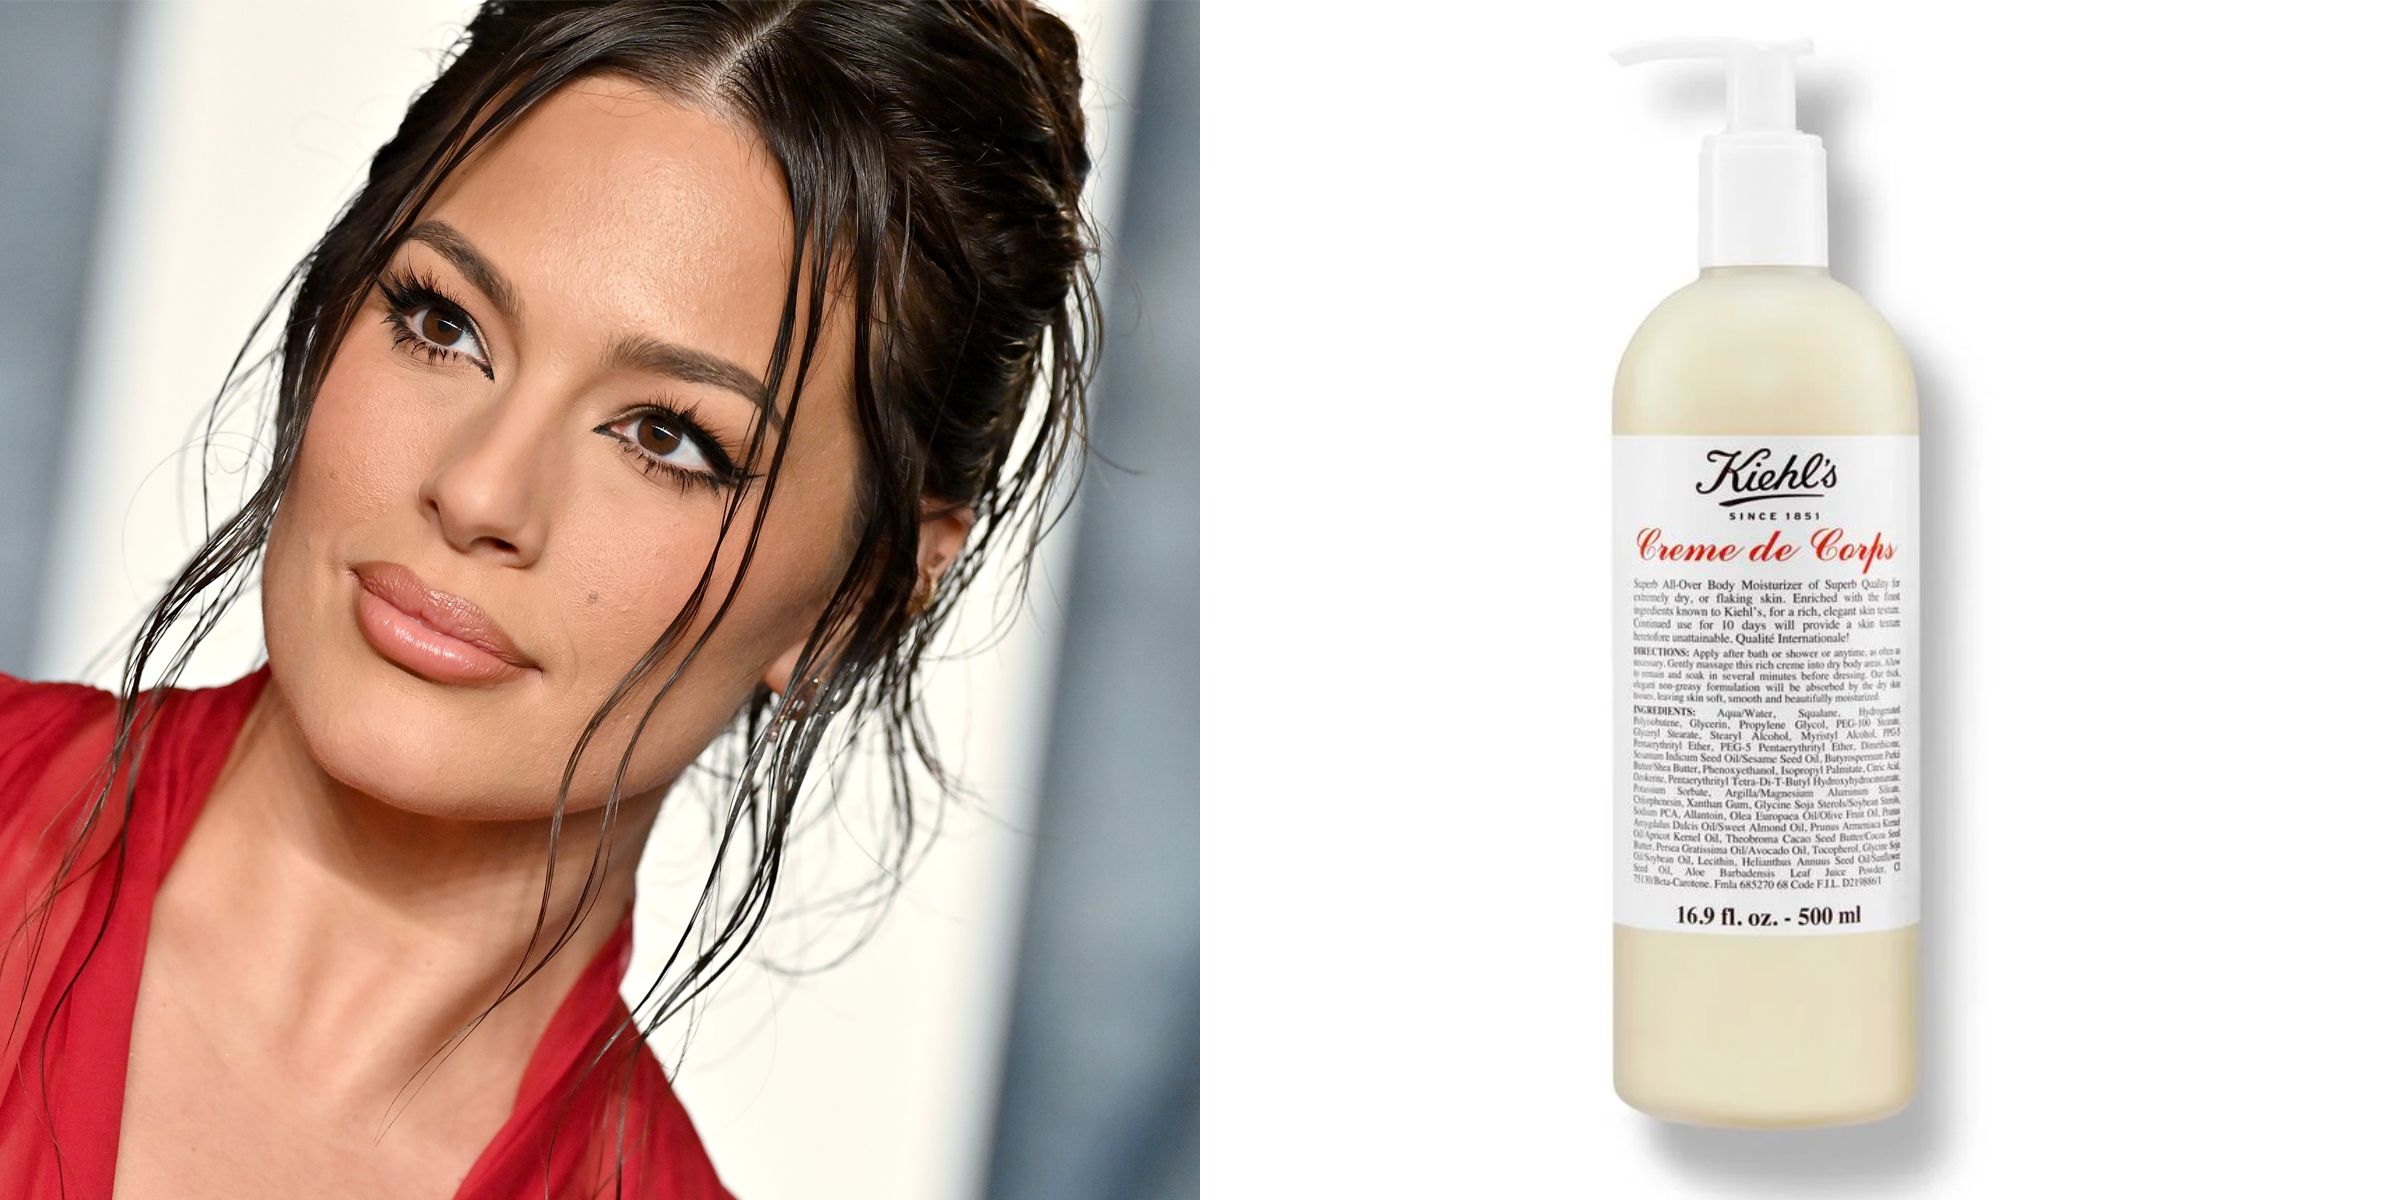 Ashley Graham's Body Lotion is On Sale for 25% Off Right Now